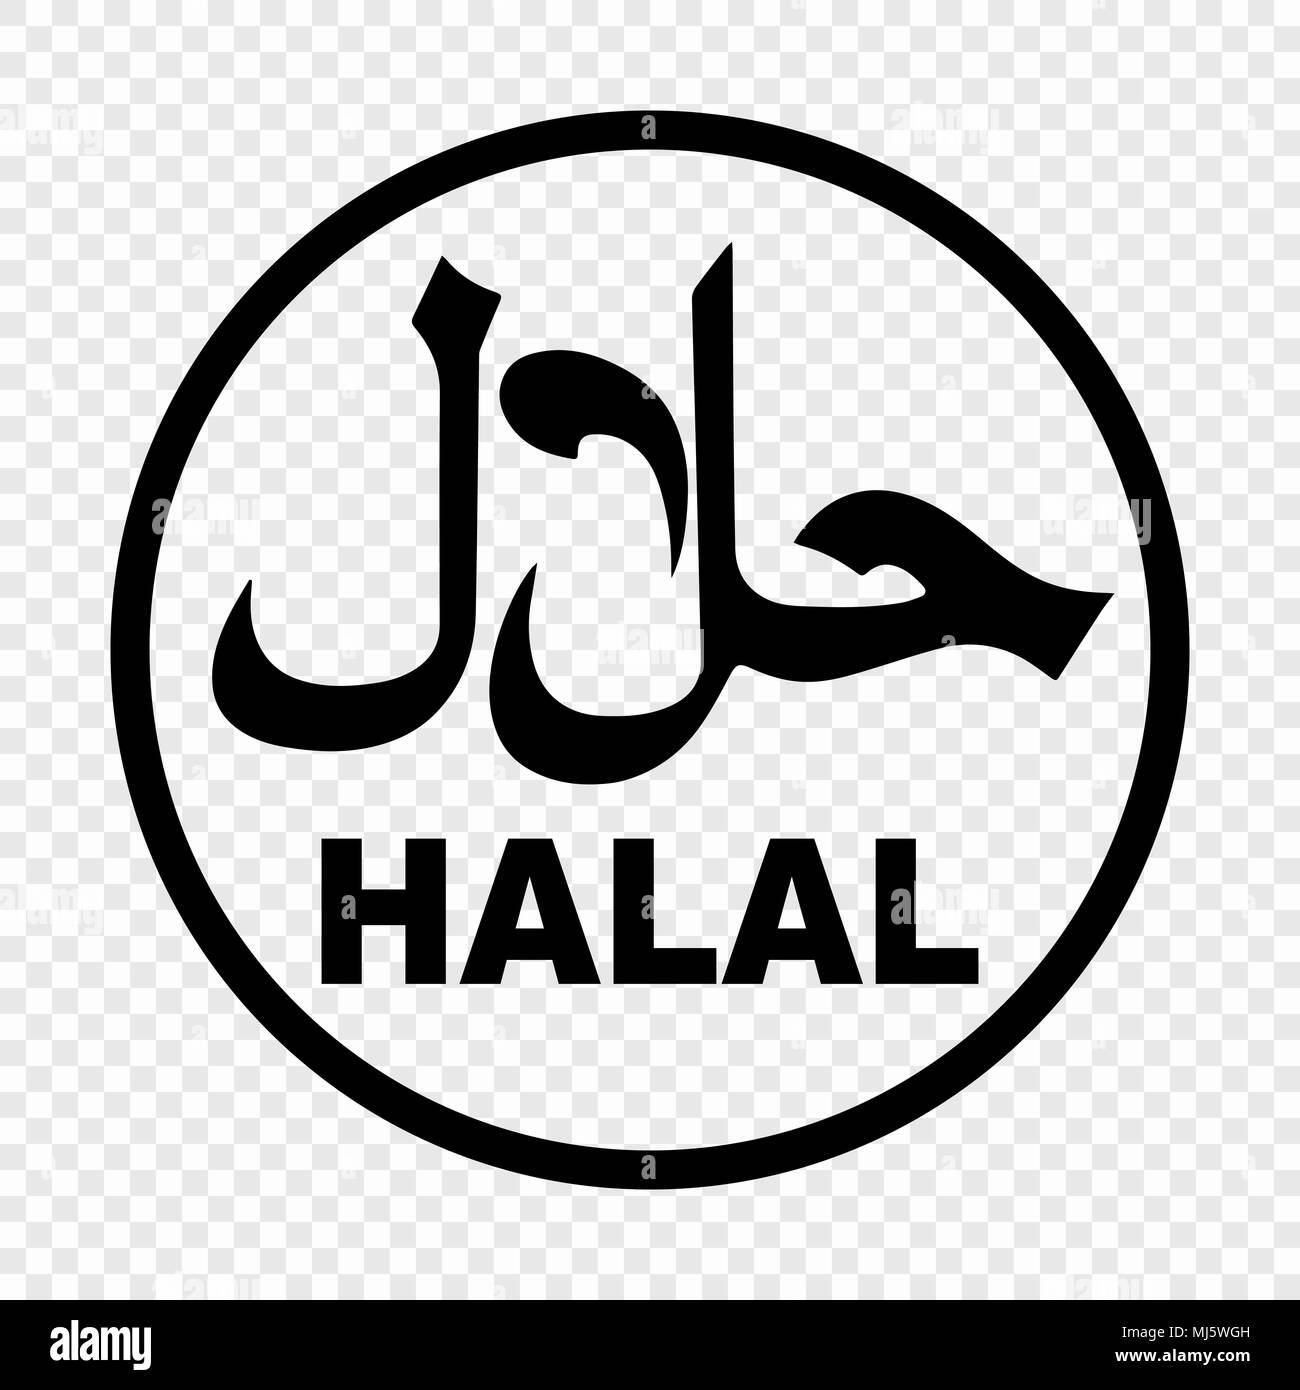 Halal logo vector. Food product dietary label for apps Stock Vector